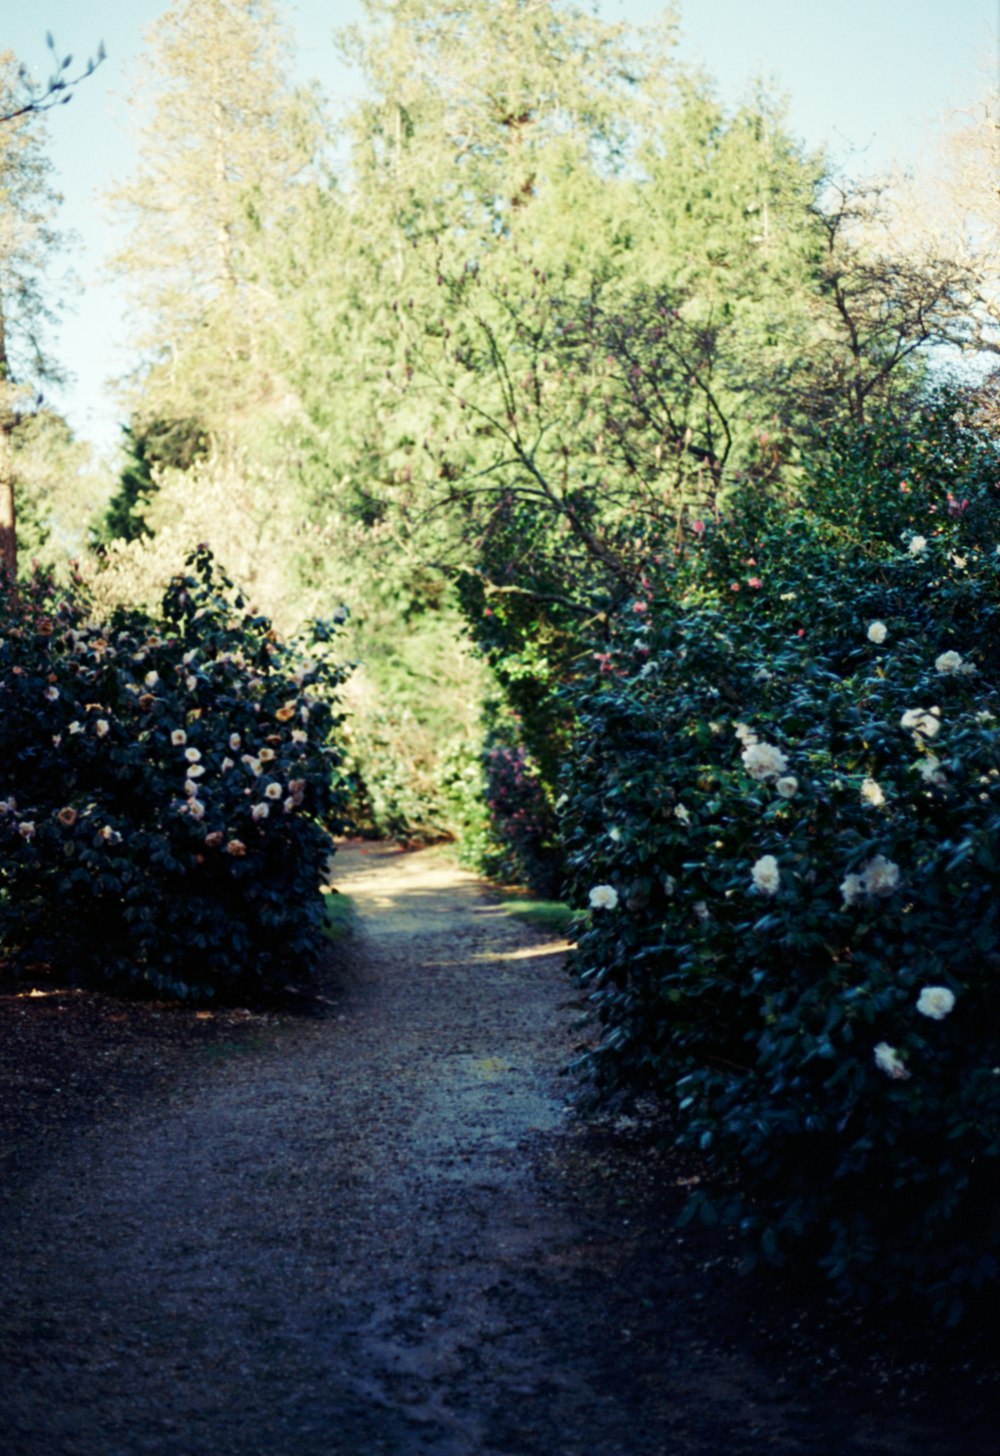 a path through a garden with white flowers